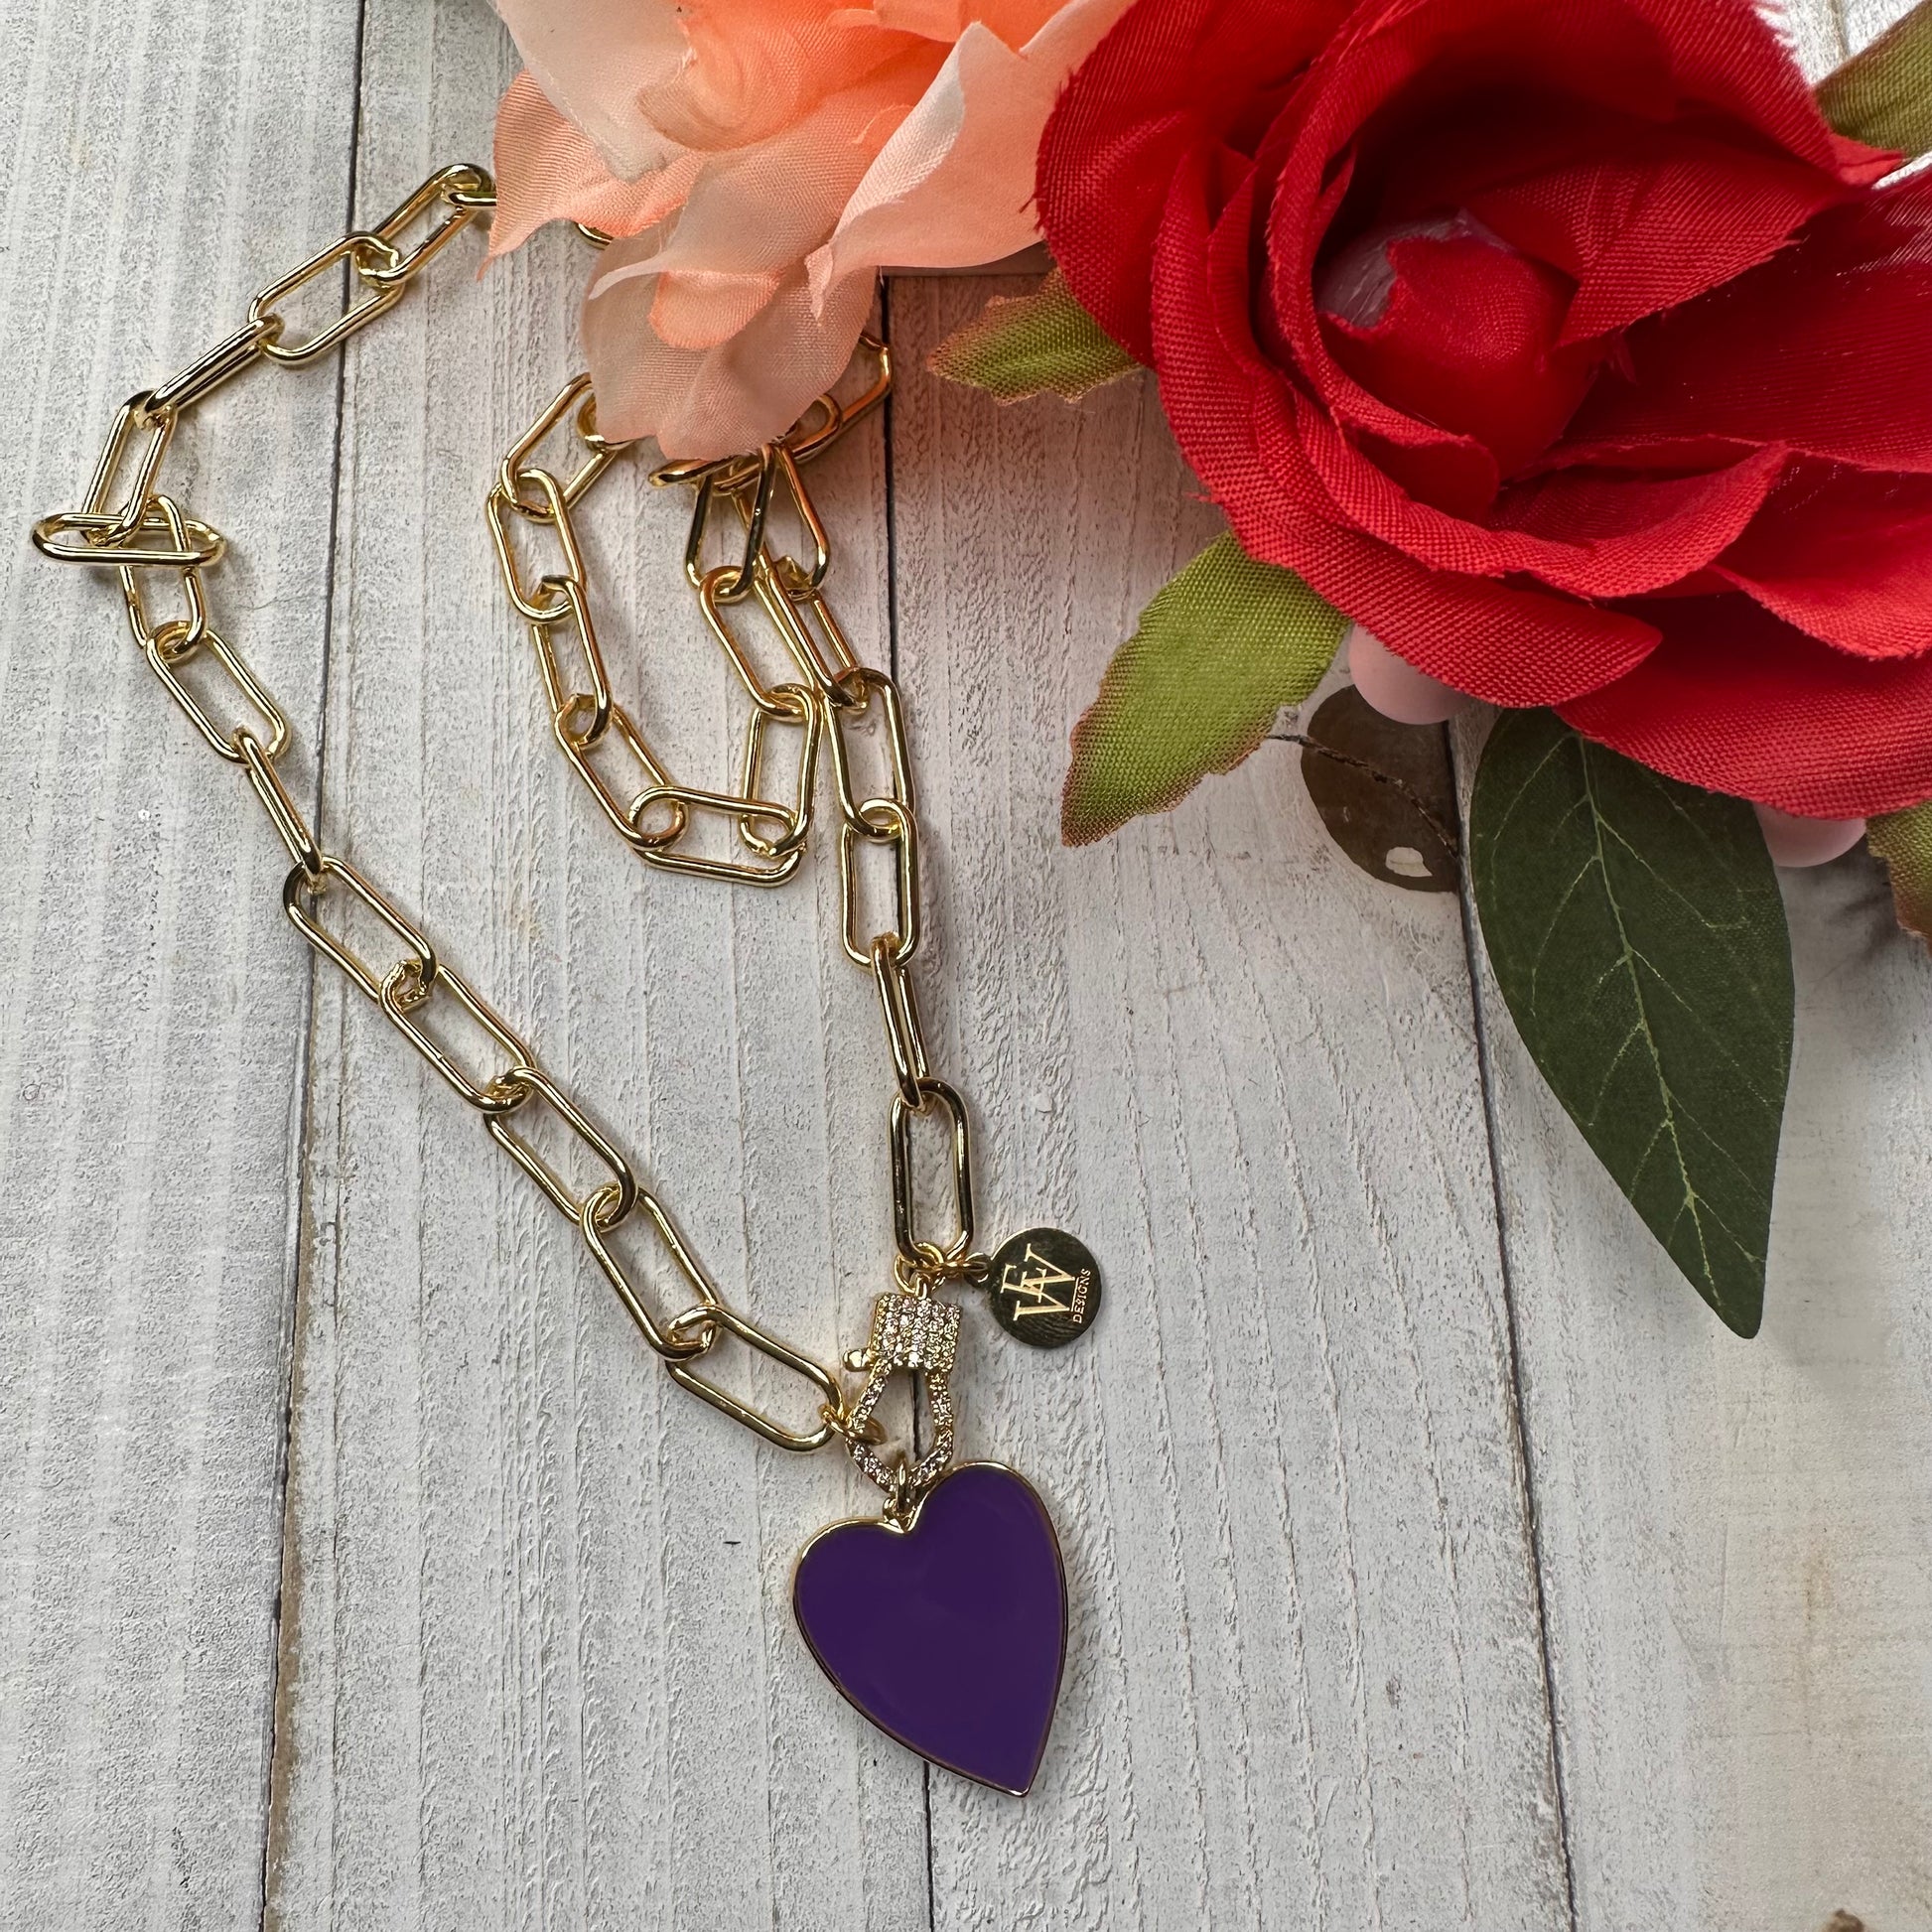 Paper Clip Chain Necklace with Purple Enameled Heart Pendant 